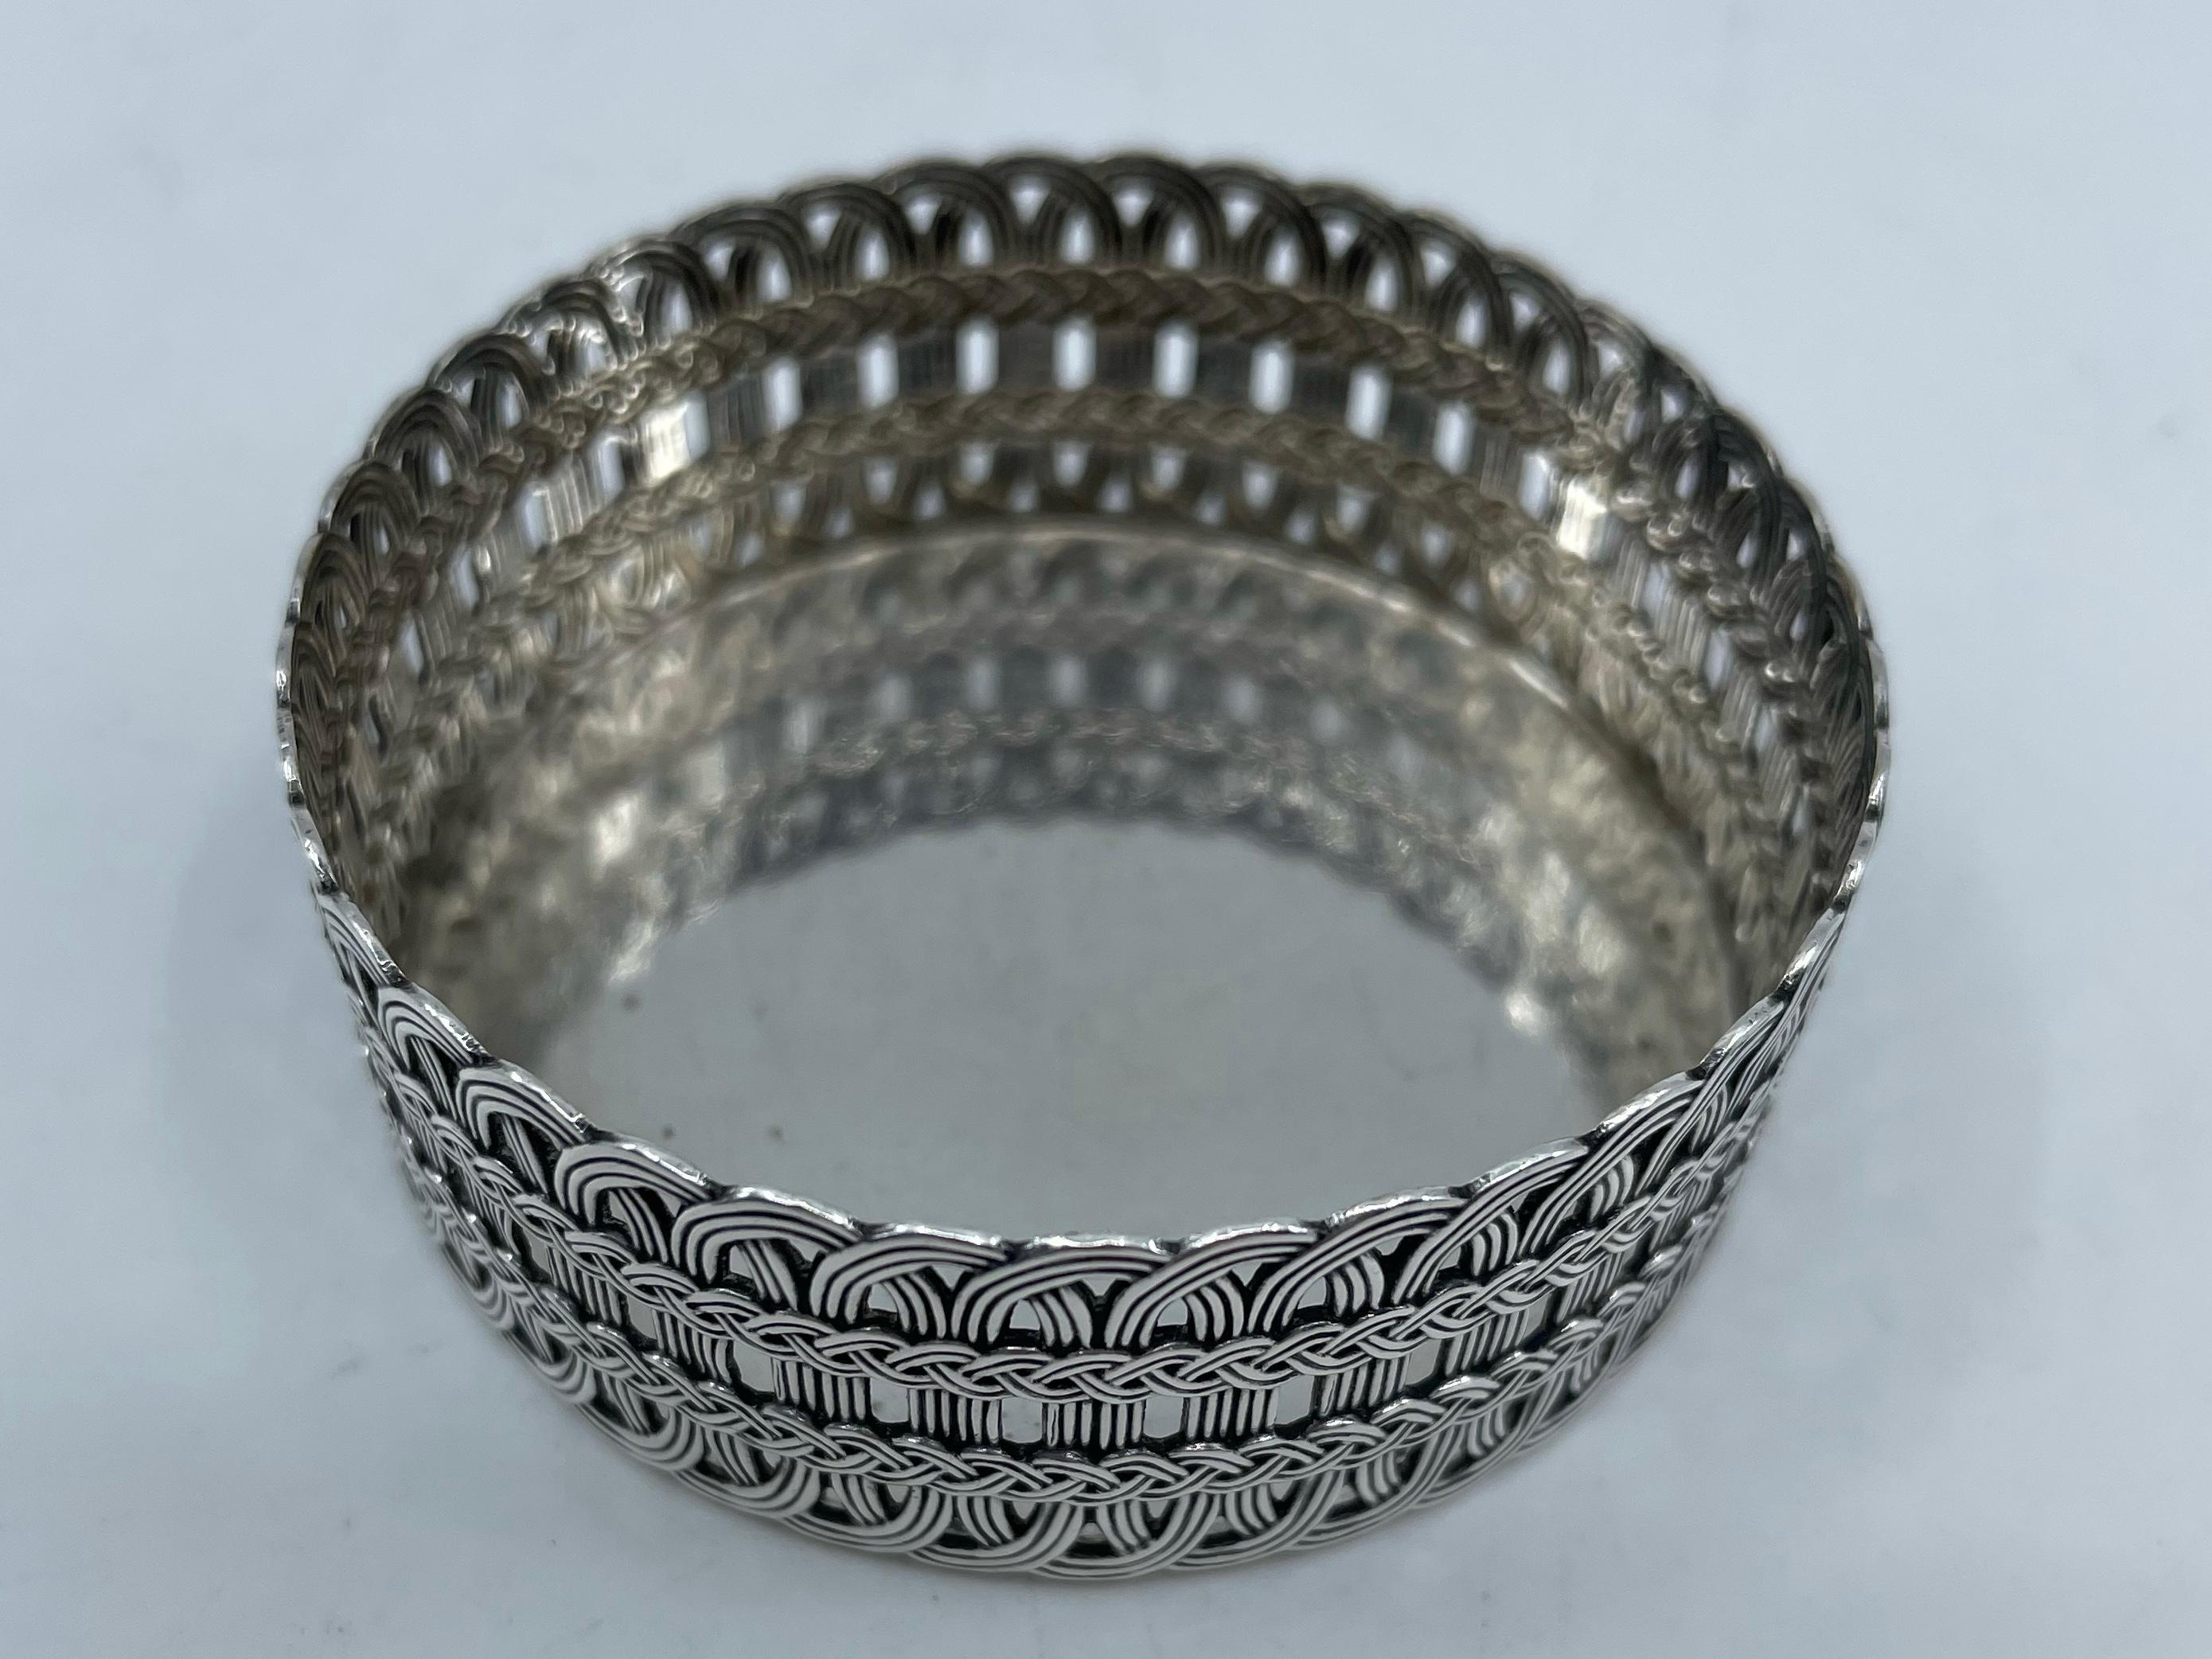 Christian Dior sterling silver pin basket. Vintage Dior wicker silver basket desk accessory for pins, clips etc. France, 1960s
Dimensions: 2.57